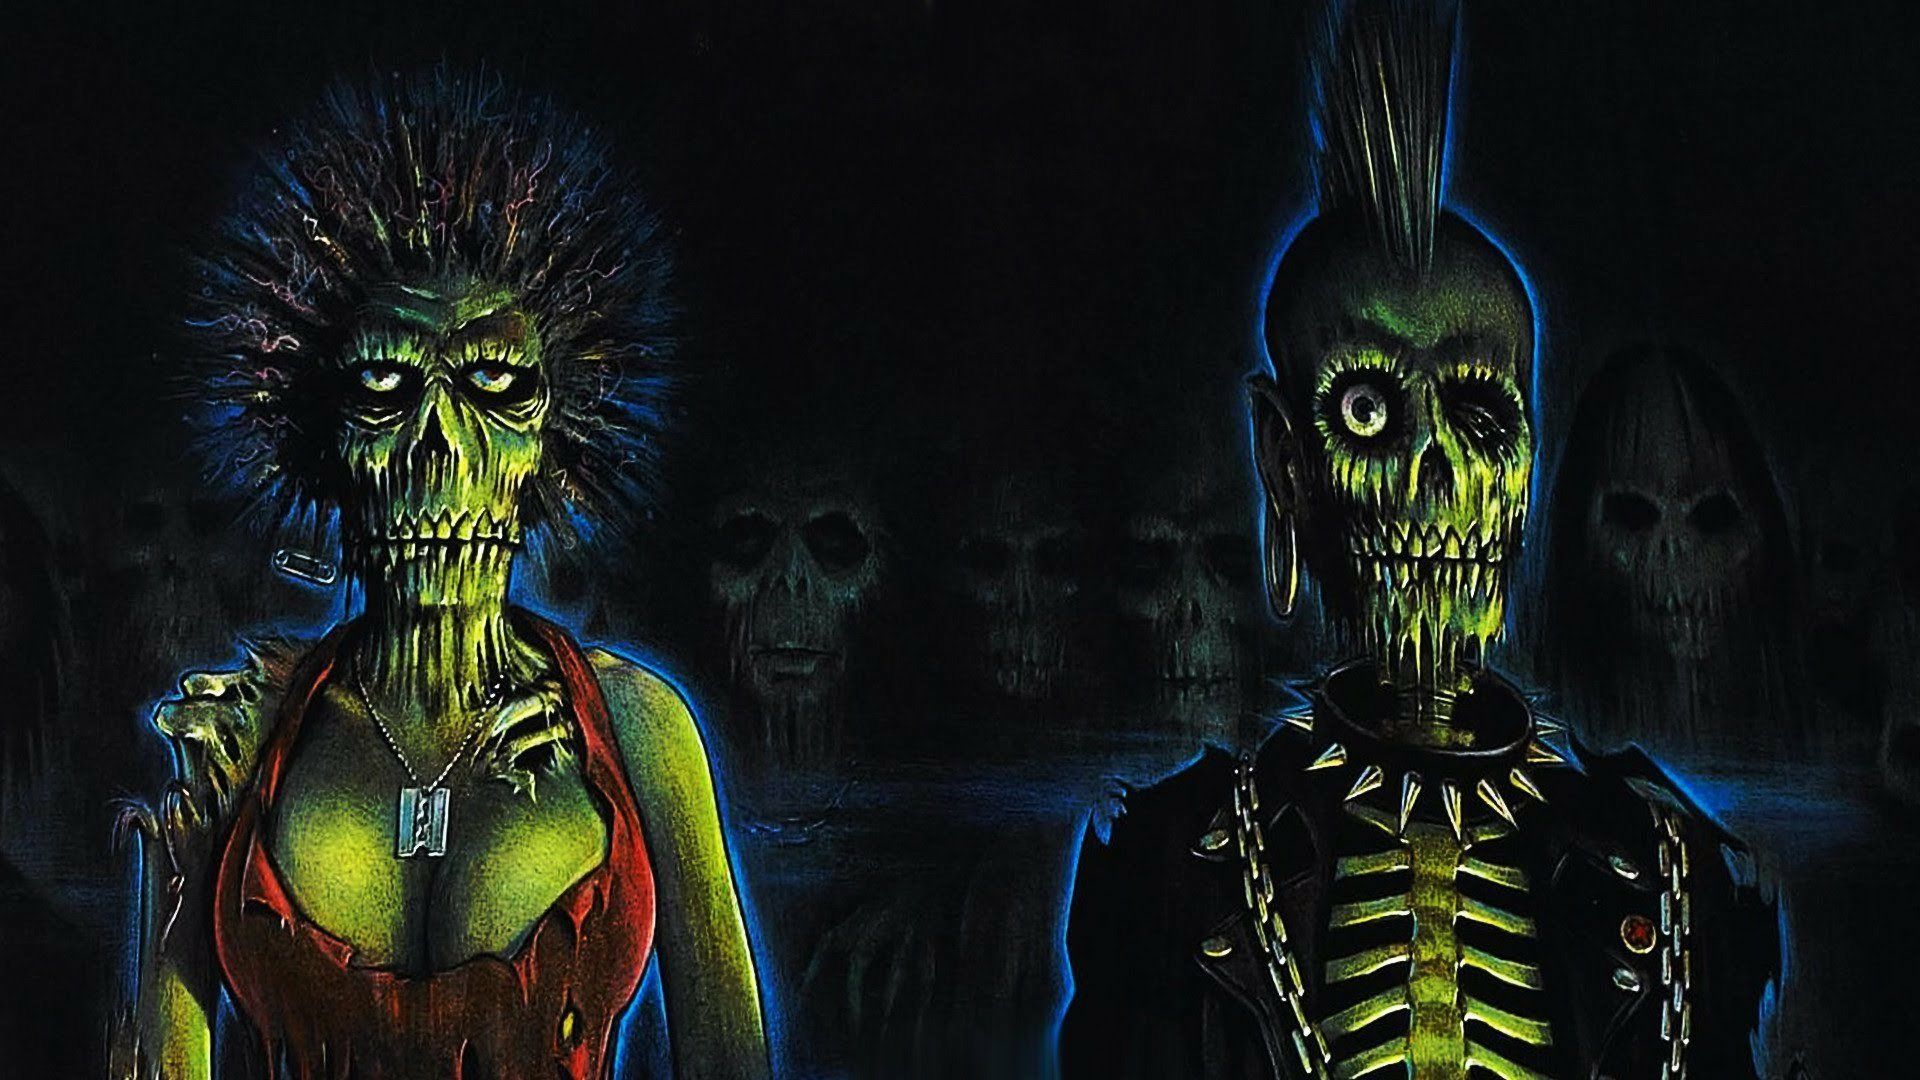 The Return of the Living Dead background